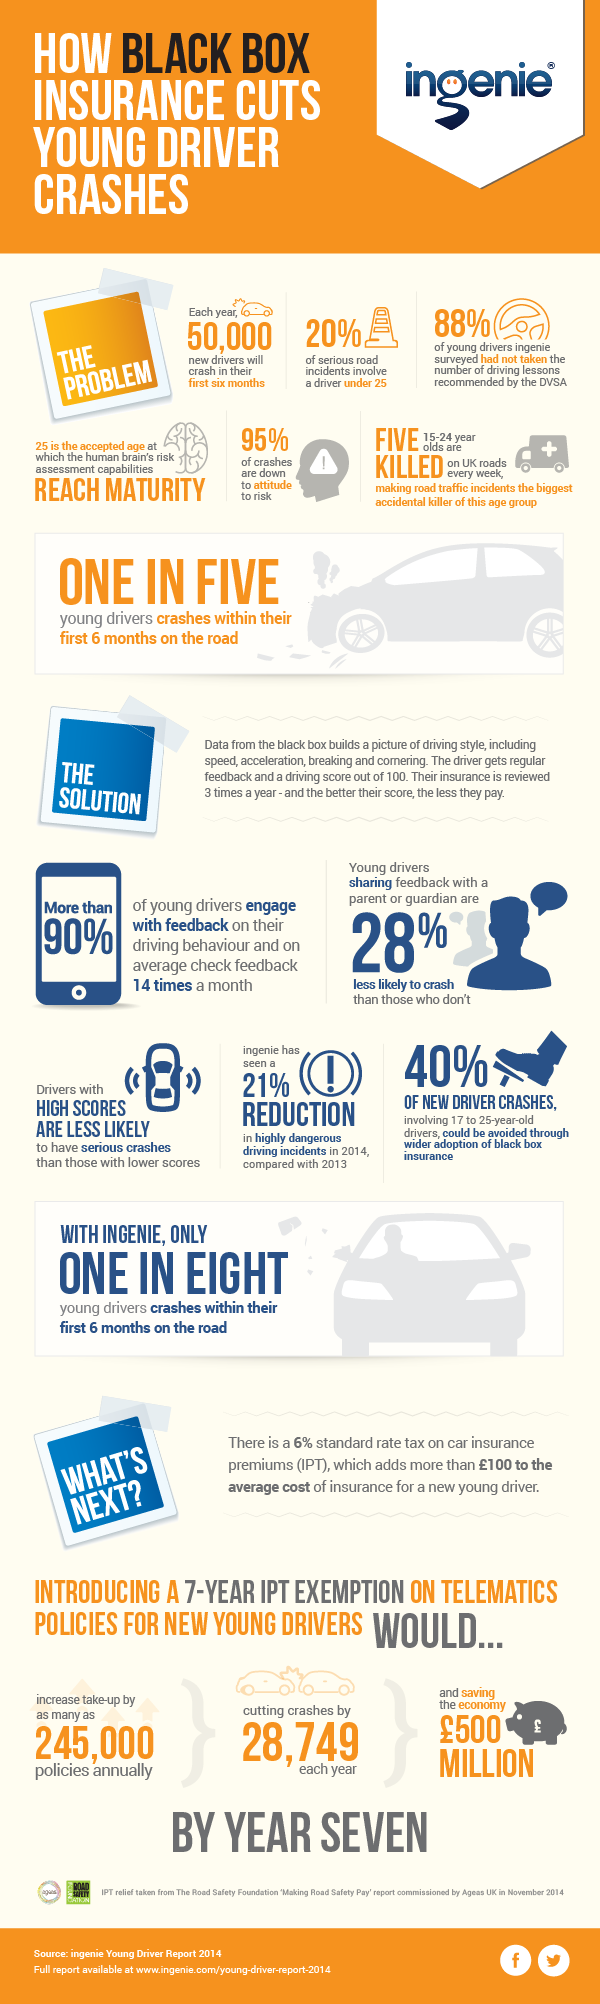 How Blackbox Insurance Cuts Young Driver Crashes #infographic